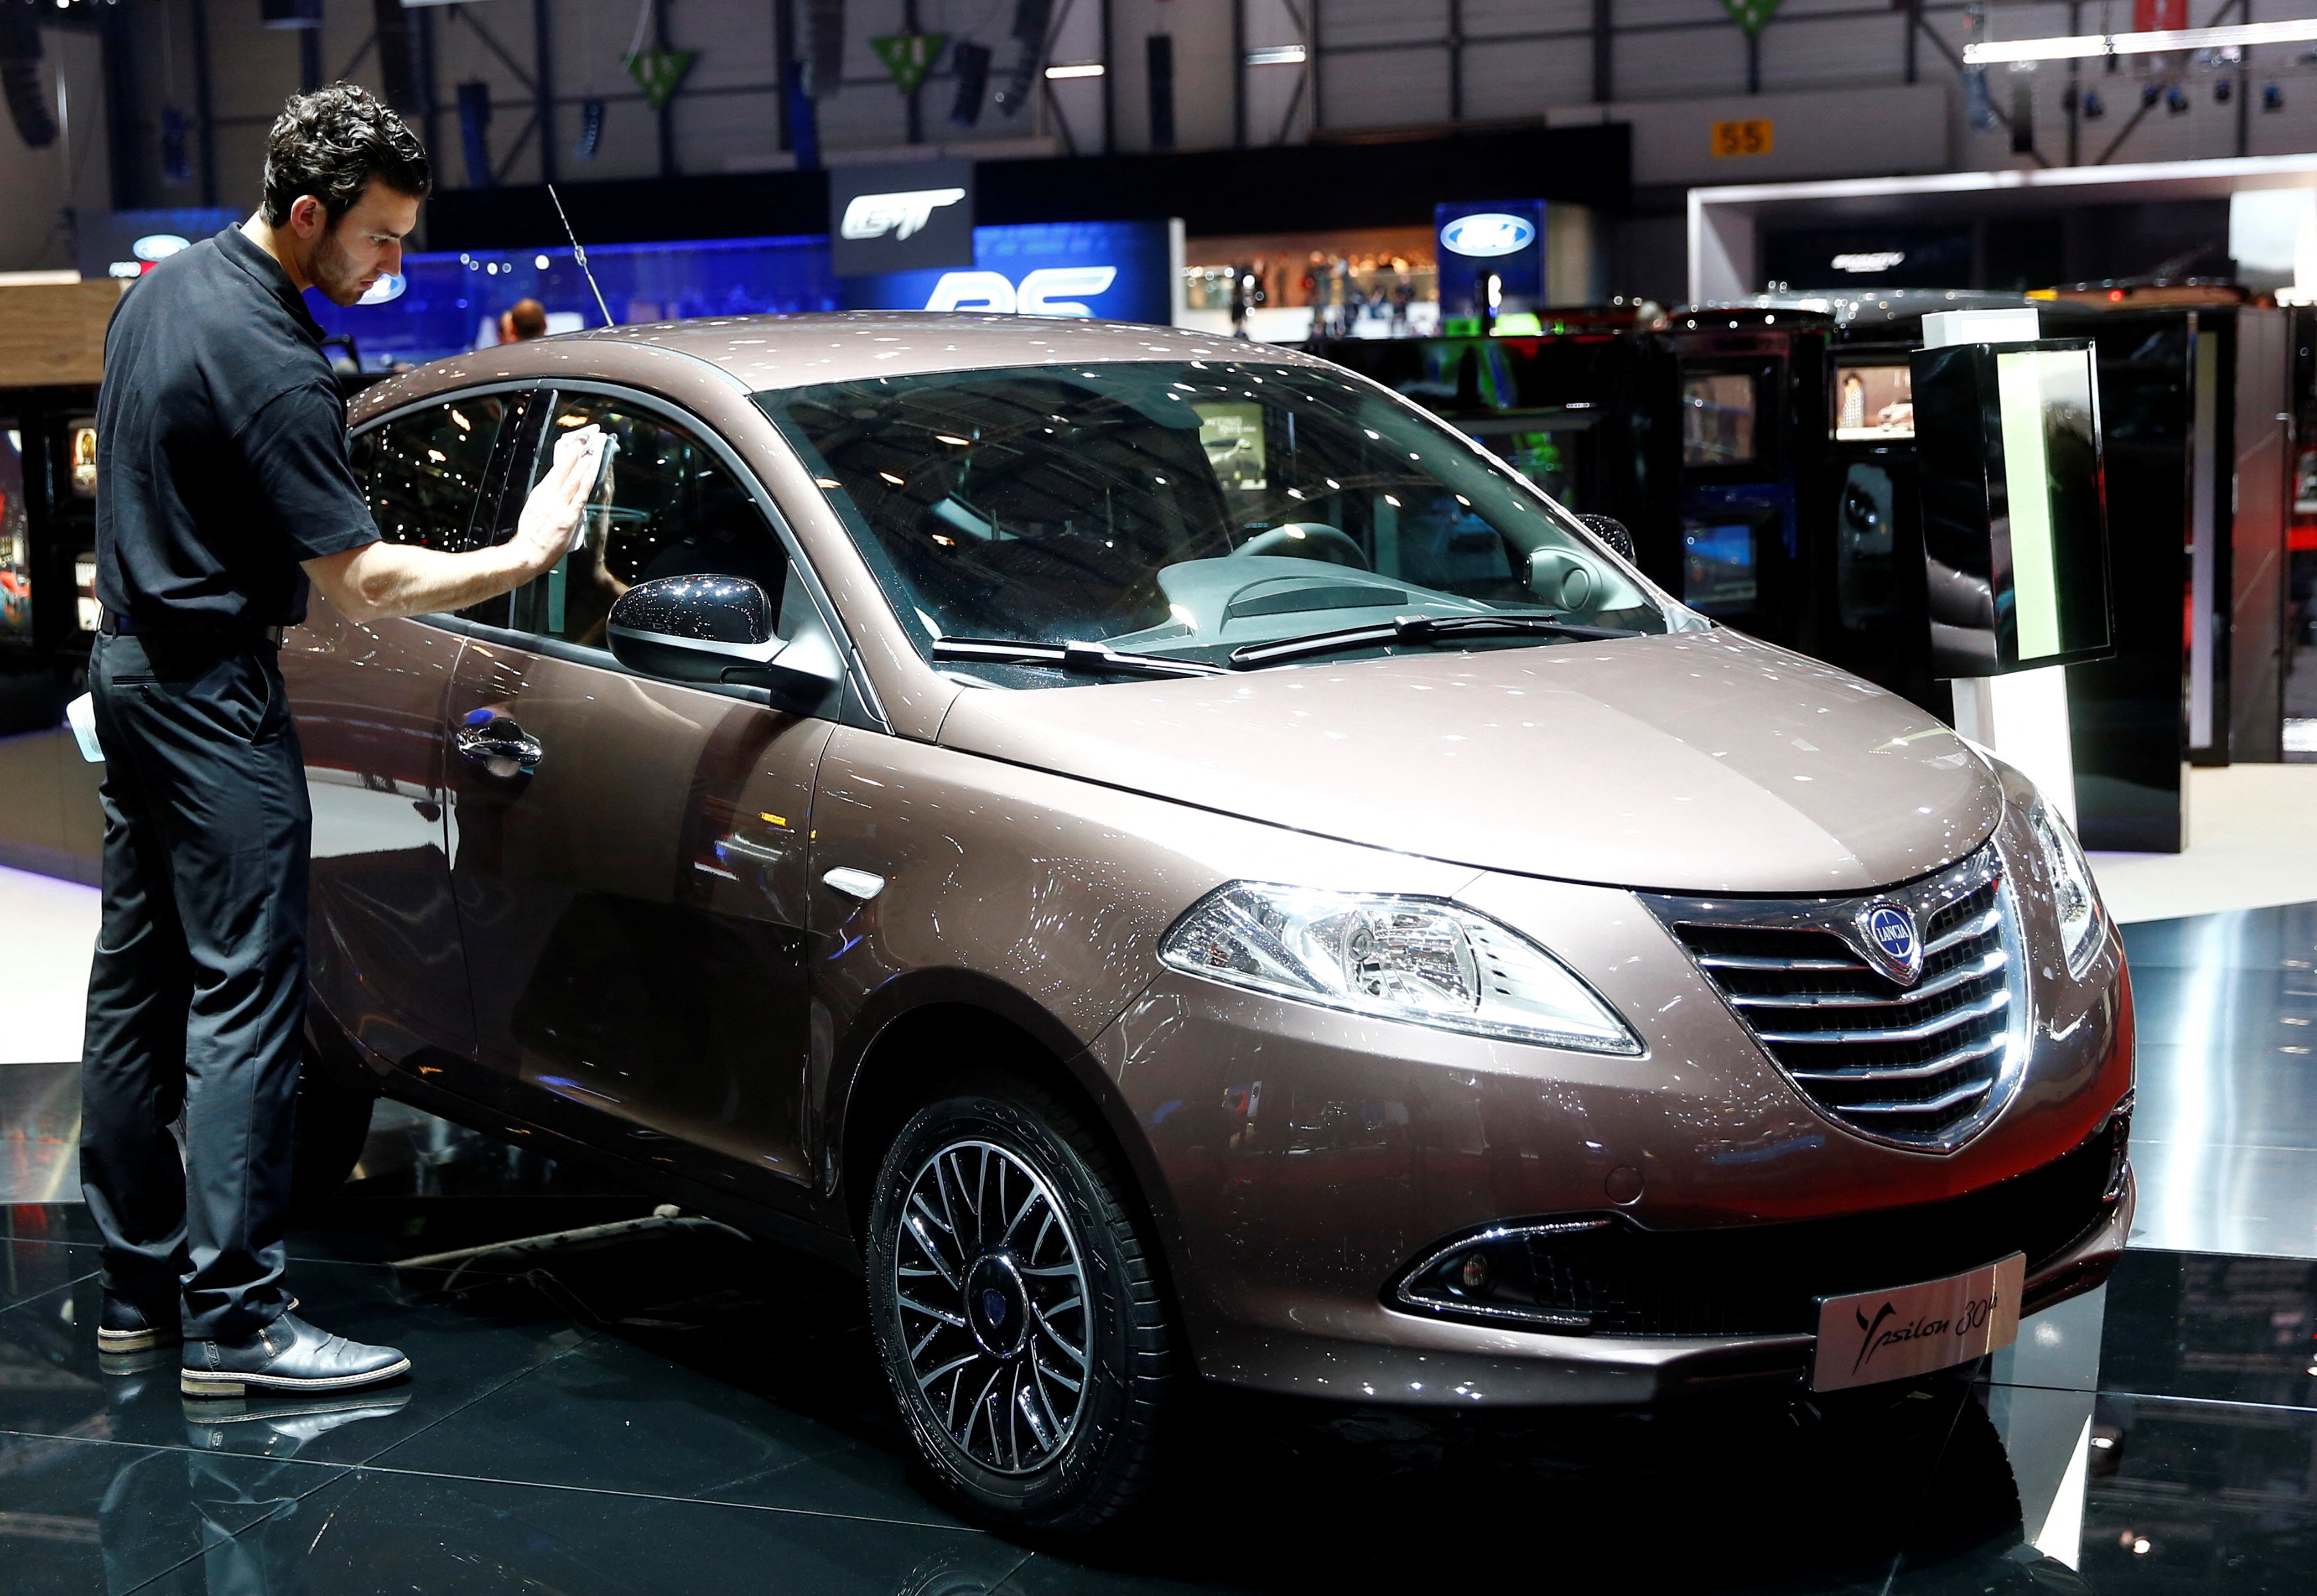 Lancia Ypsilon Goes On Sale in Europe, Should It Be Sold Here As A